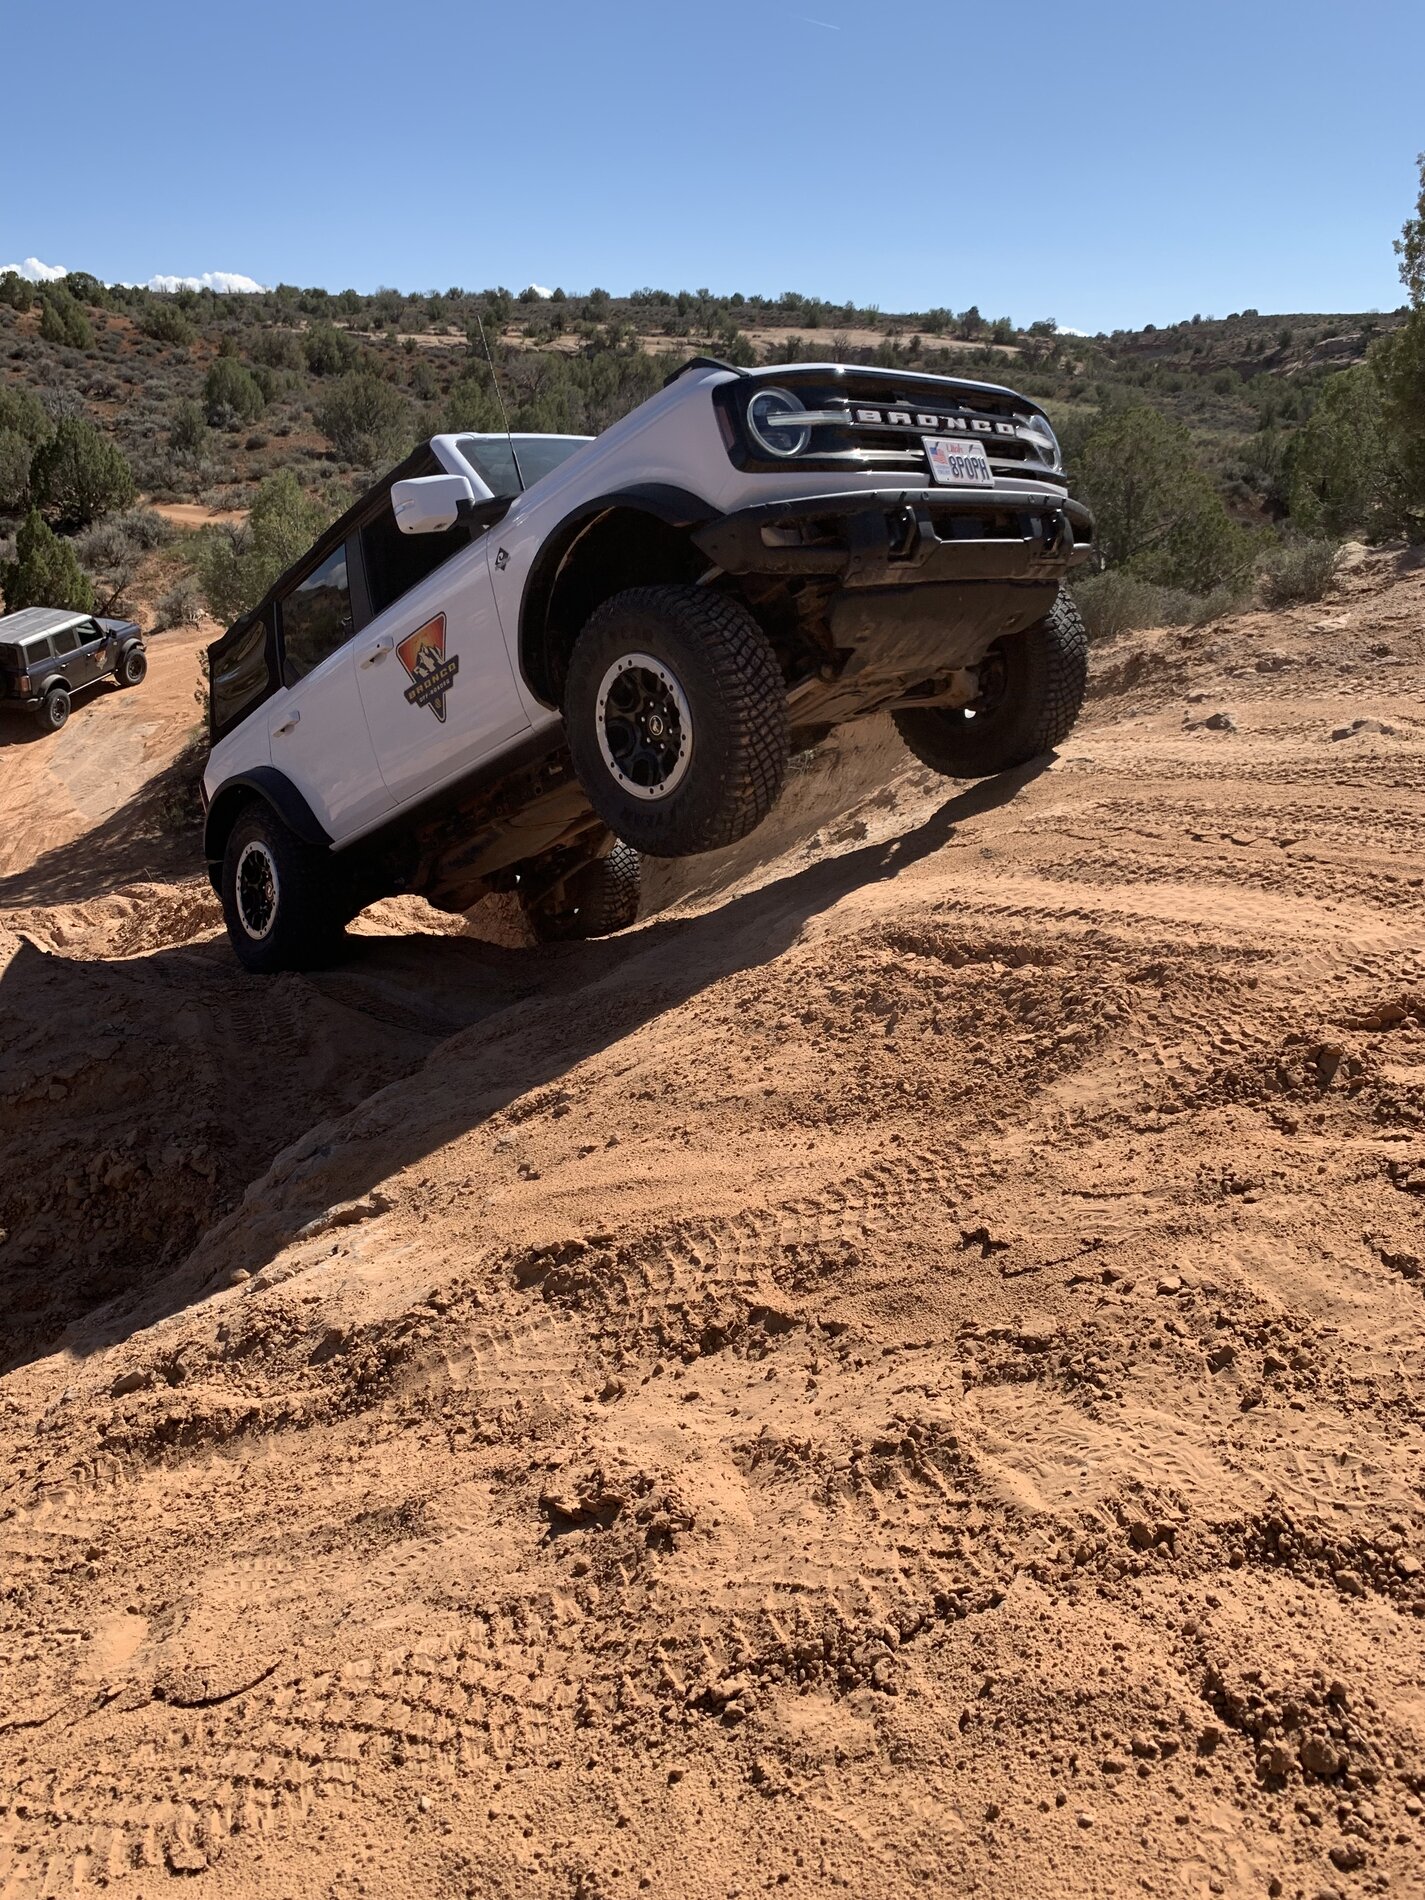 Ford Bronco Moab Ride Along – Why I was disappointed 894B9CE6-3962-46C5-945F-F162406E6771